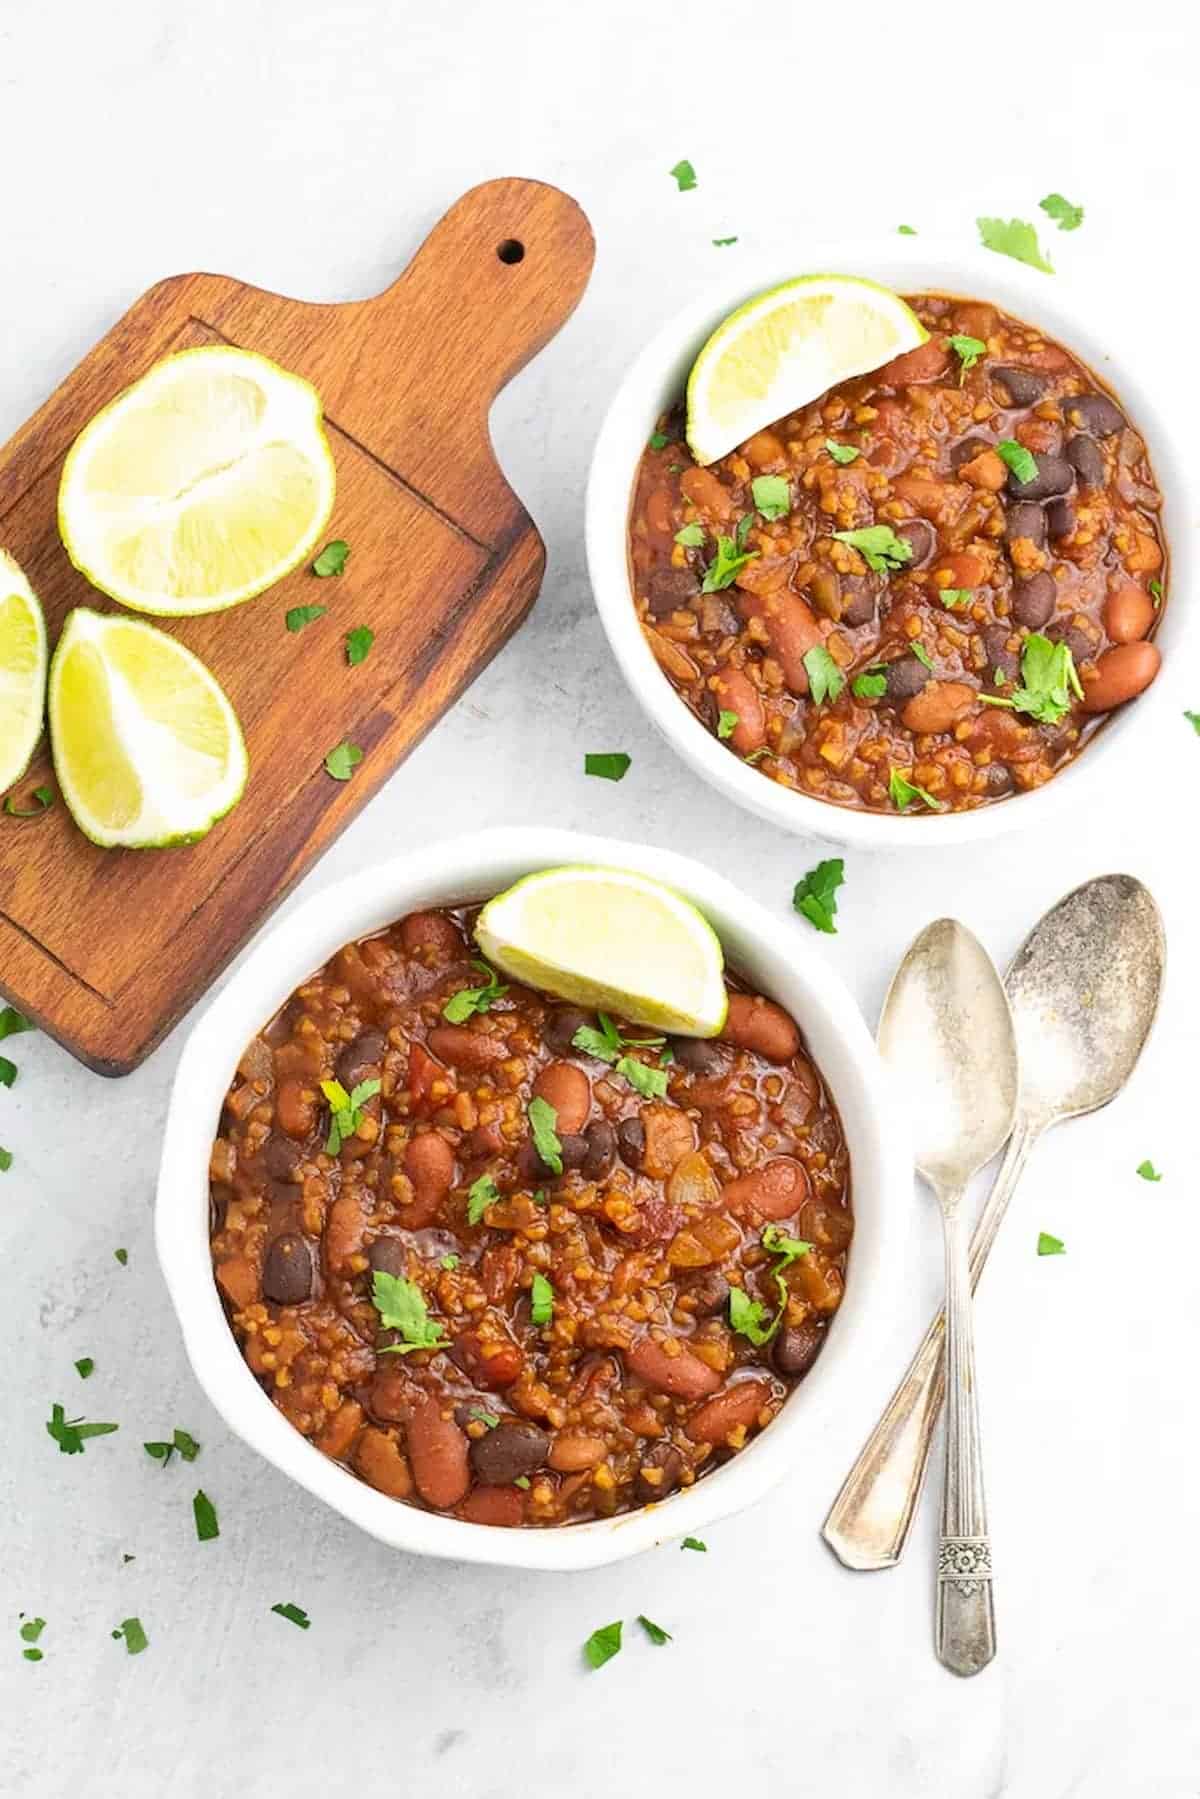 Two bowls of vegan chili served with lime wedges with cilantro.